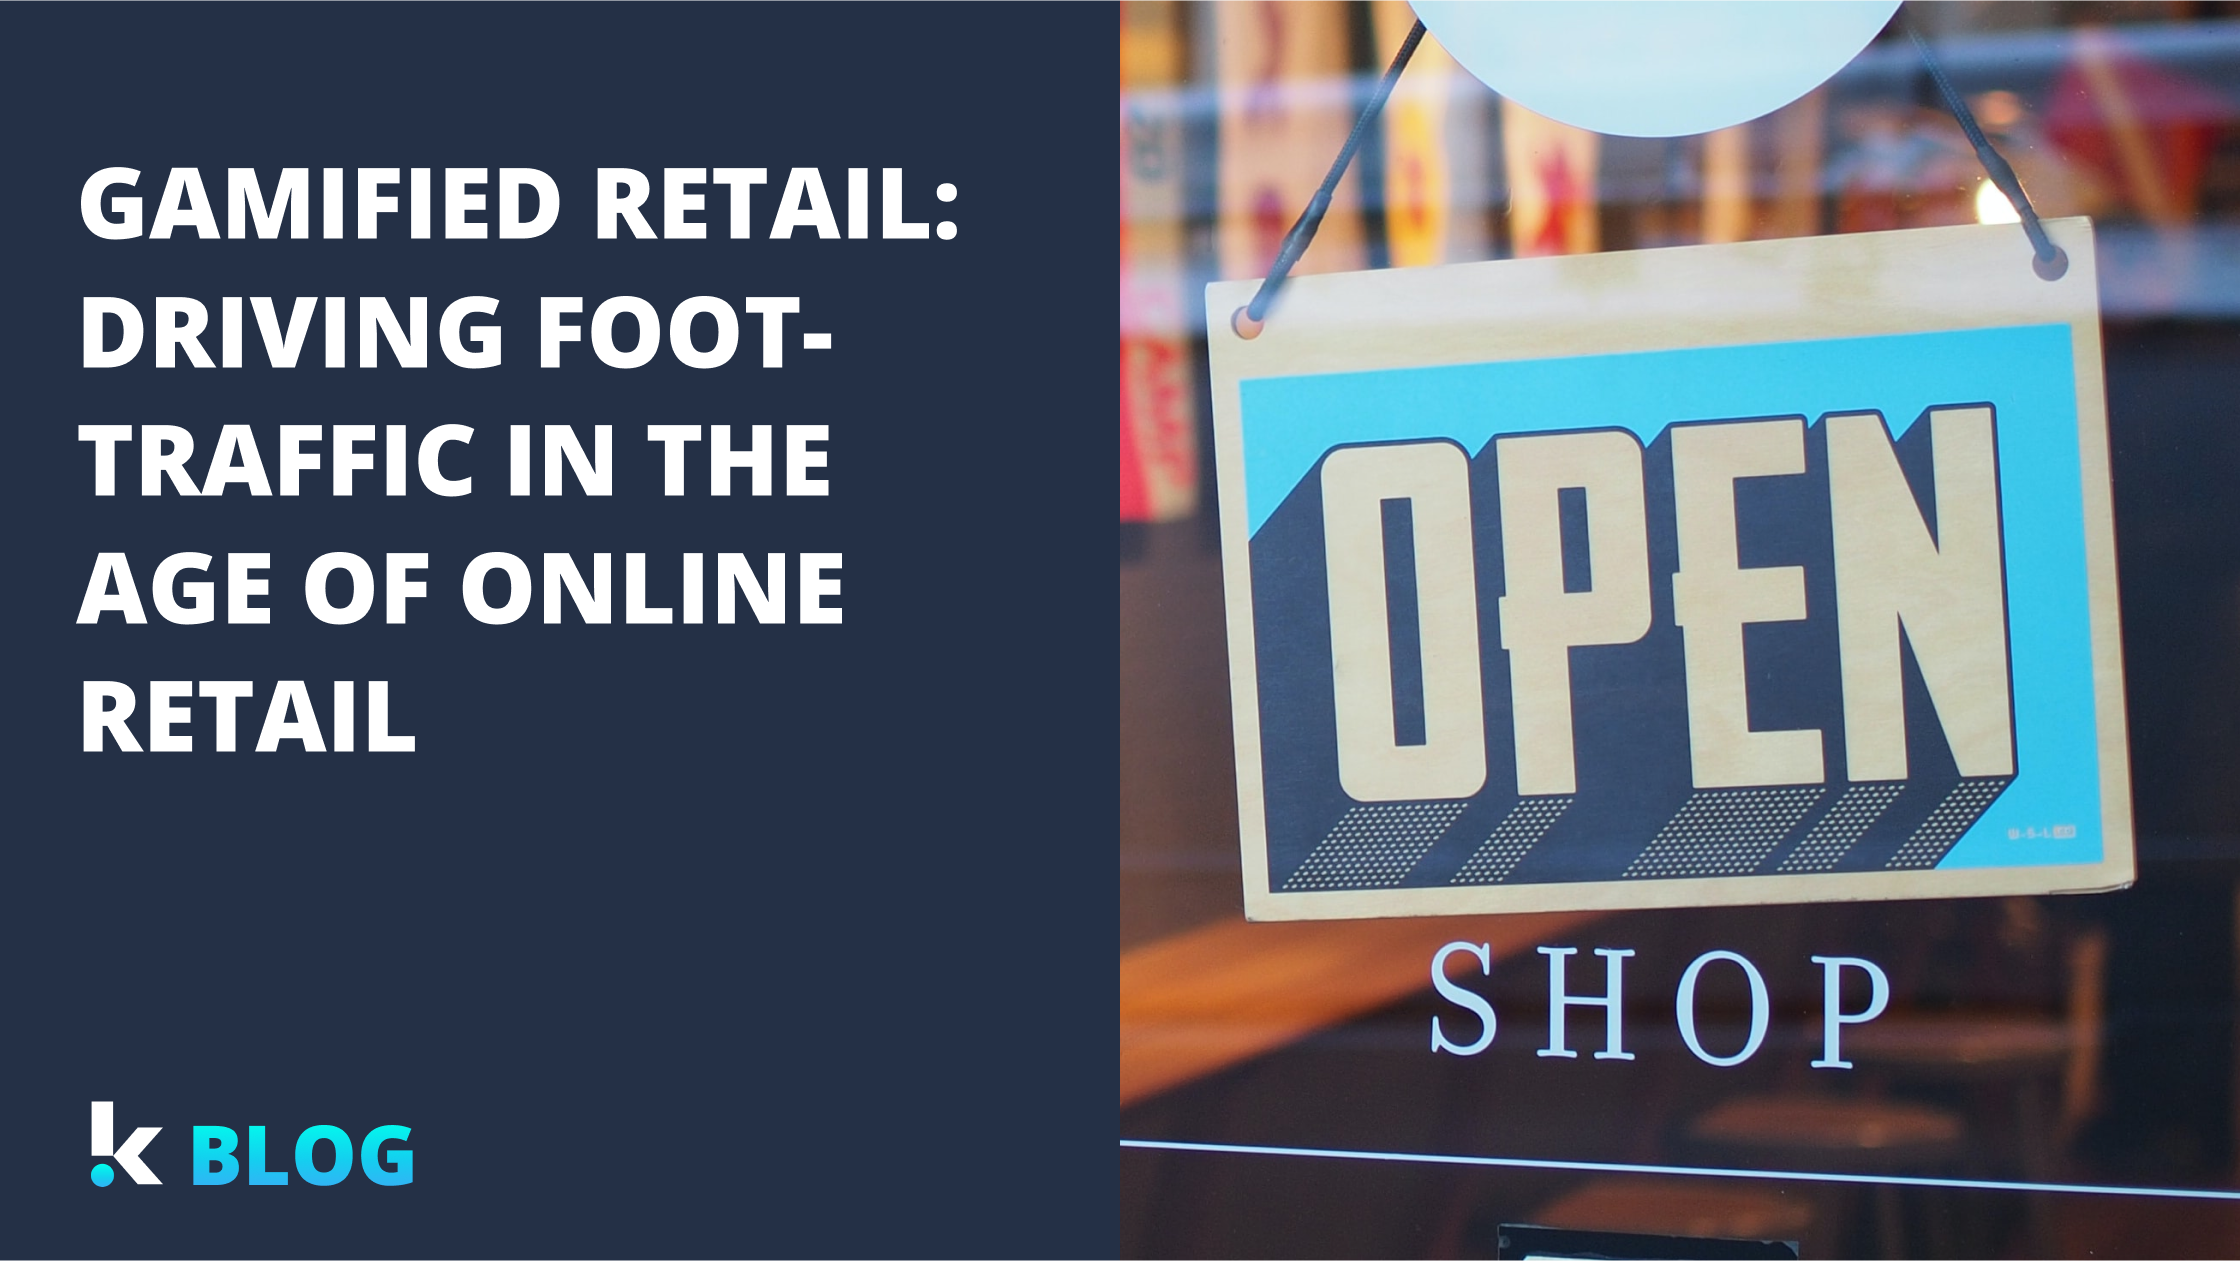 Gamified Retail: Driving Foot Traffic in the Age of Online Retail